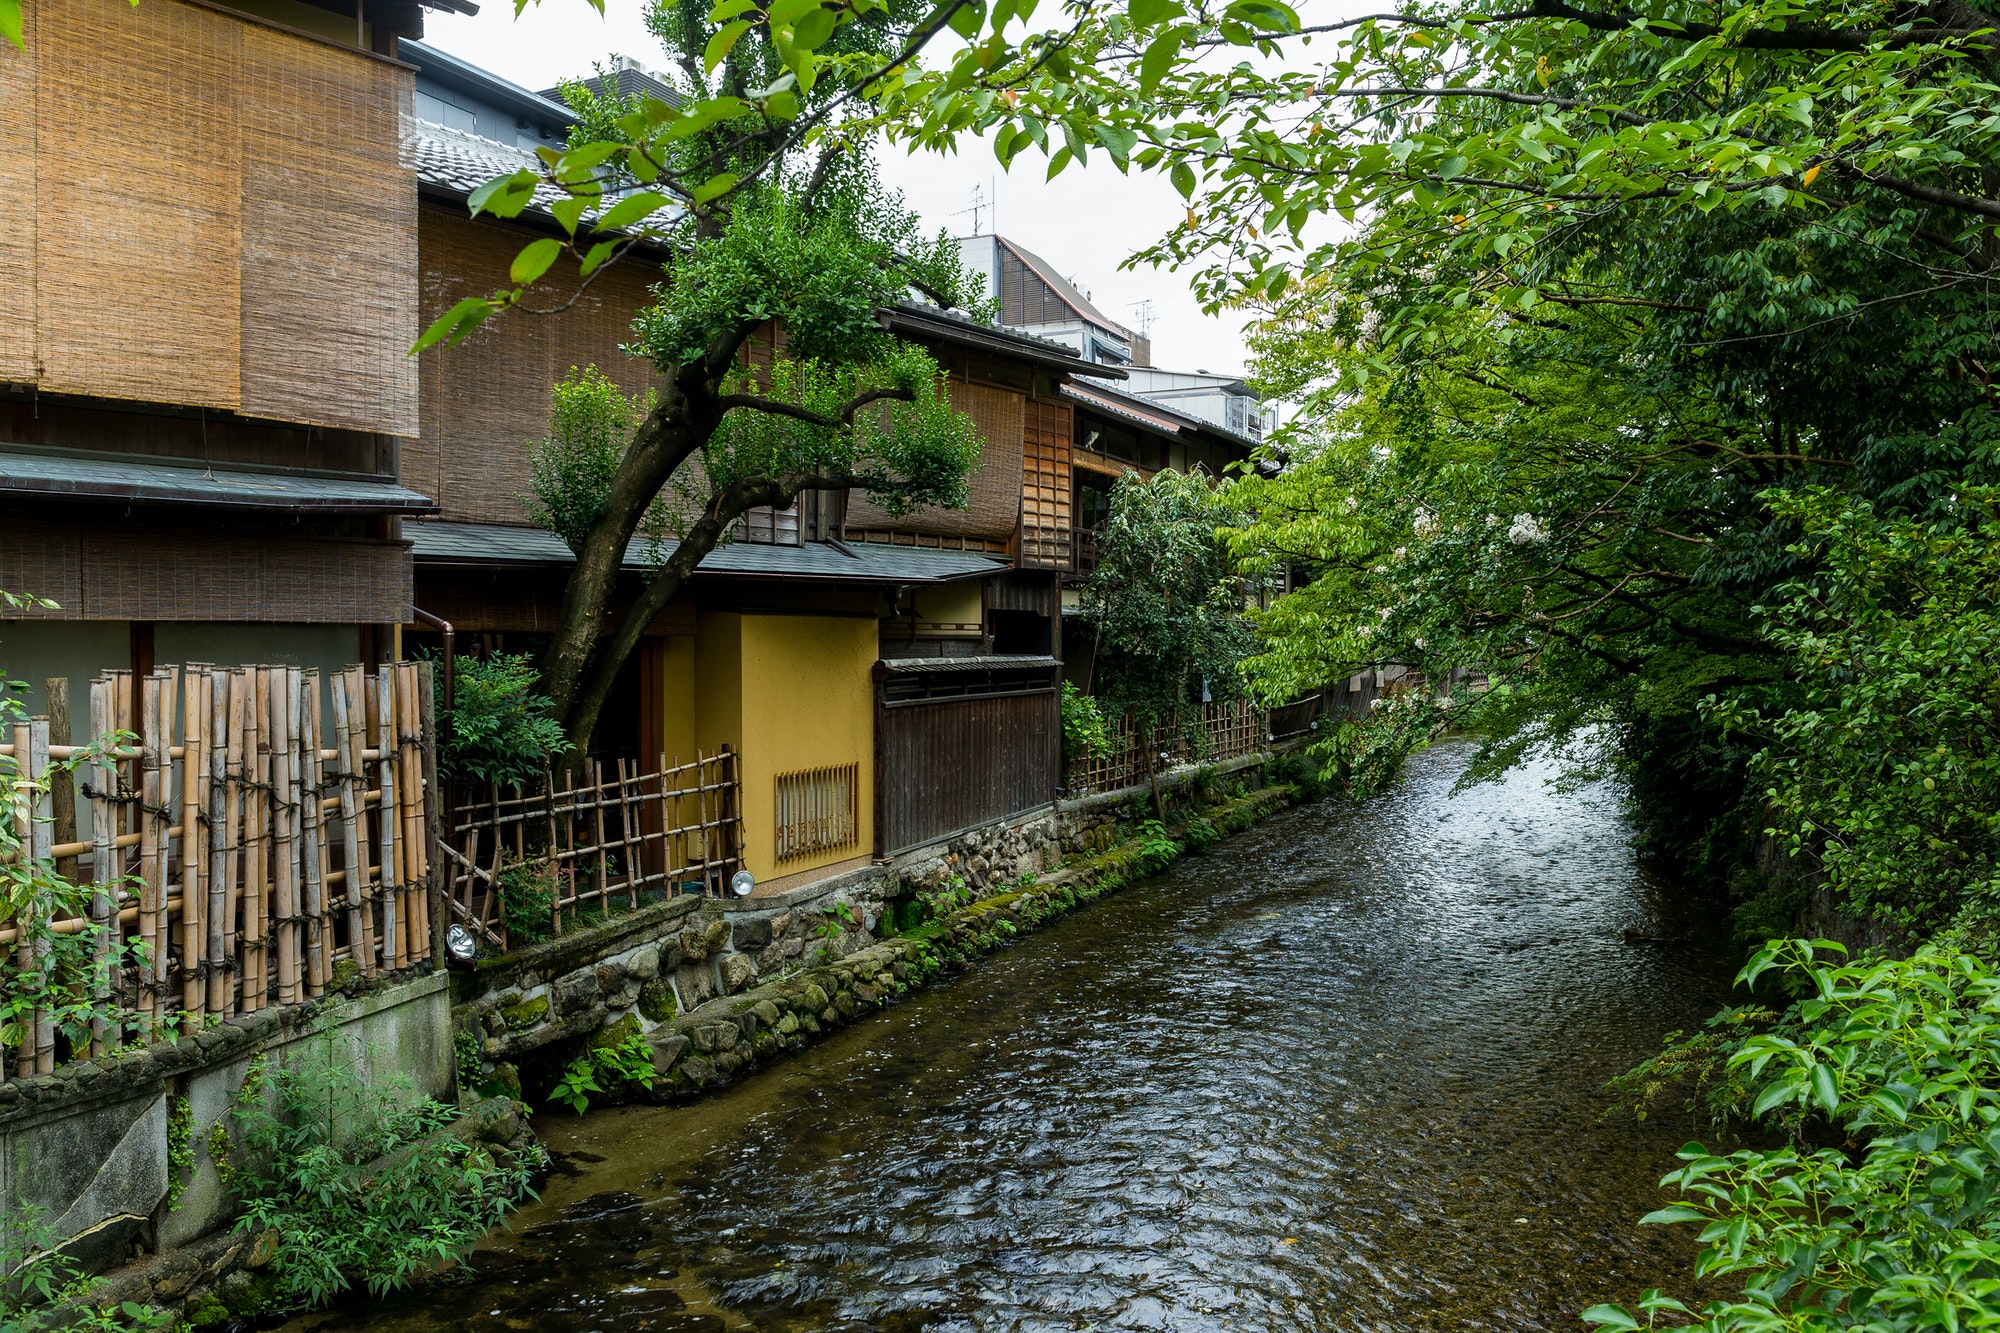 Traditional architecture in Kyoto Gion